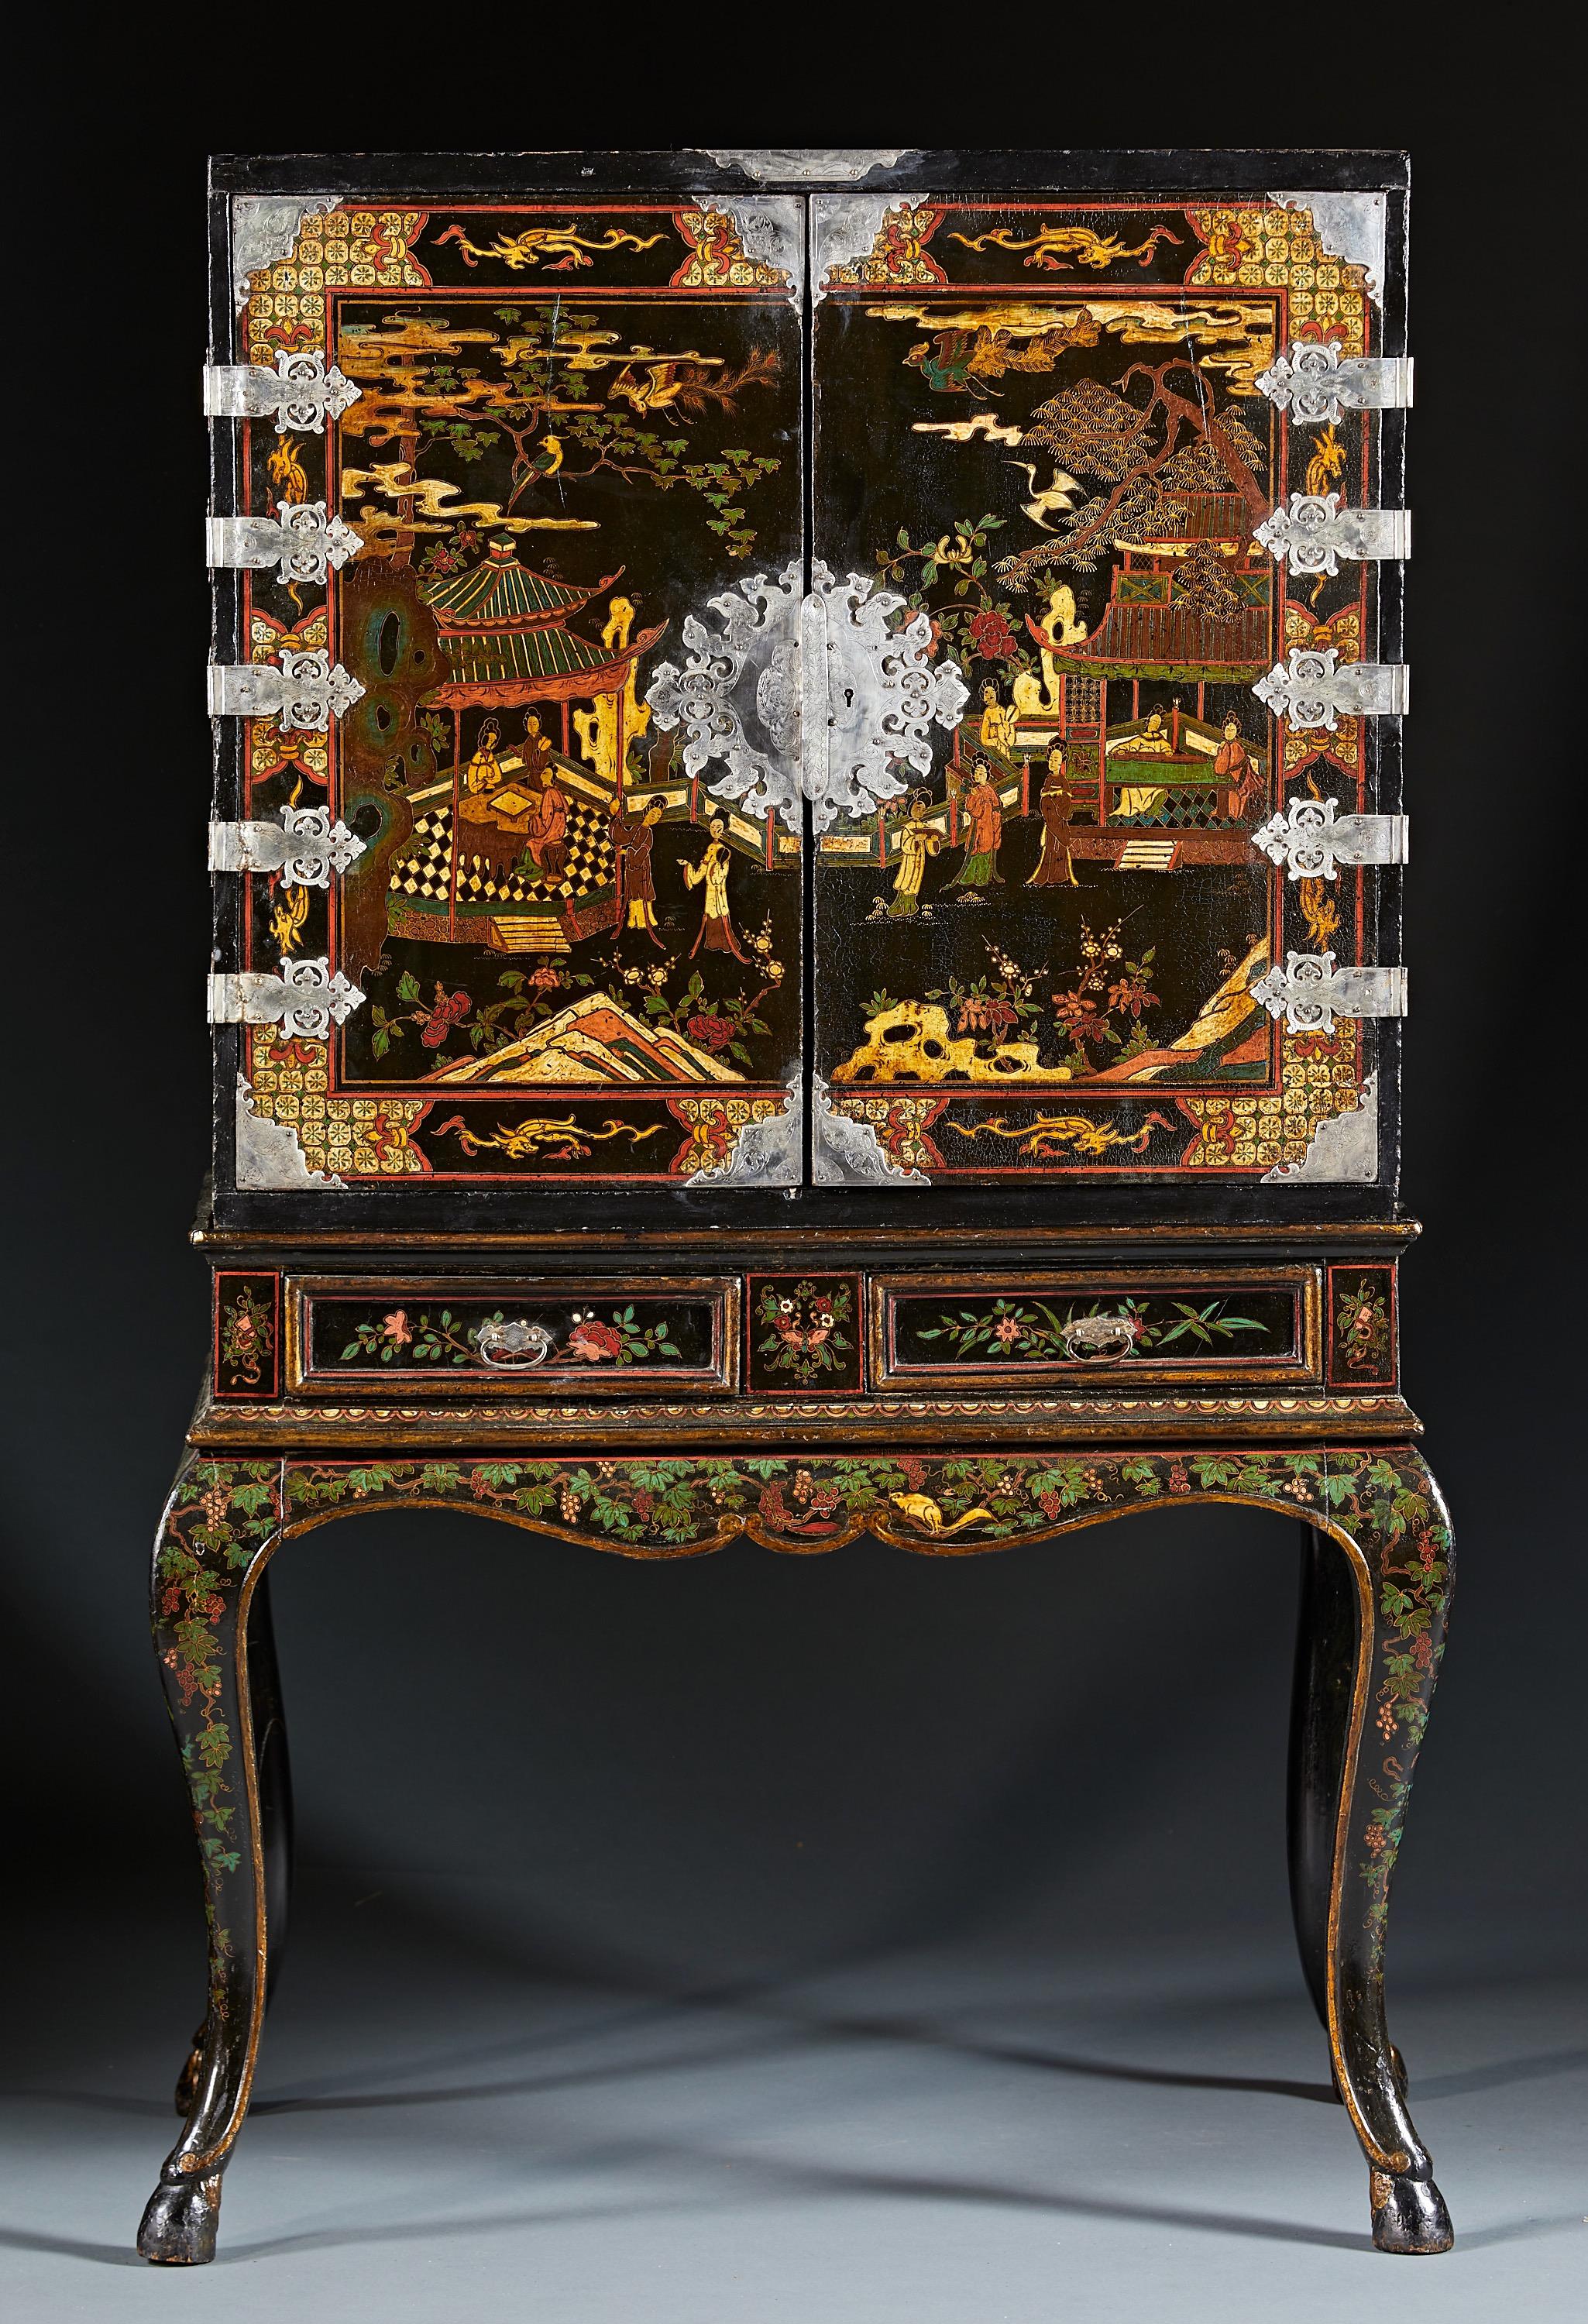 Georgian Extraordinary Chinoiserie Decorated Lacquered Cabinet, Circa 1730, Engliand For Sale